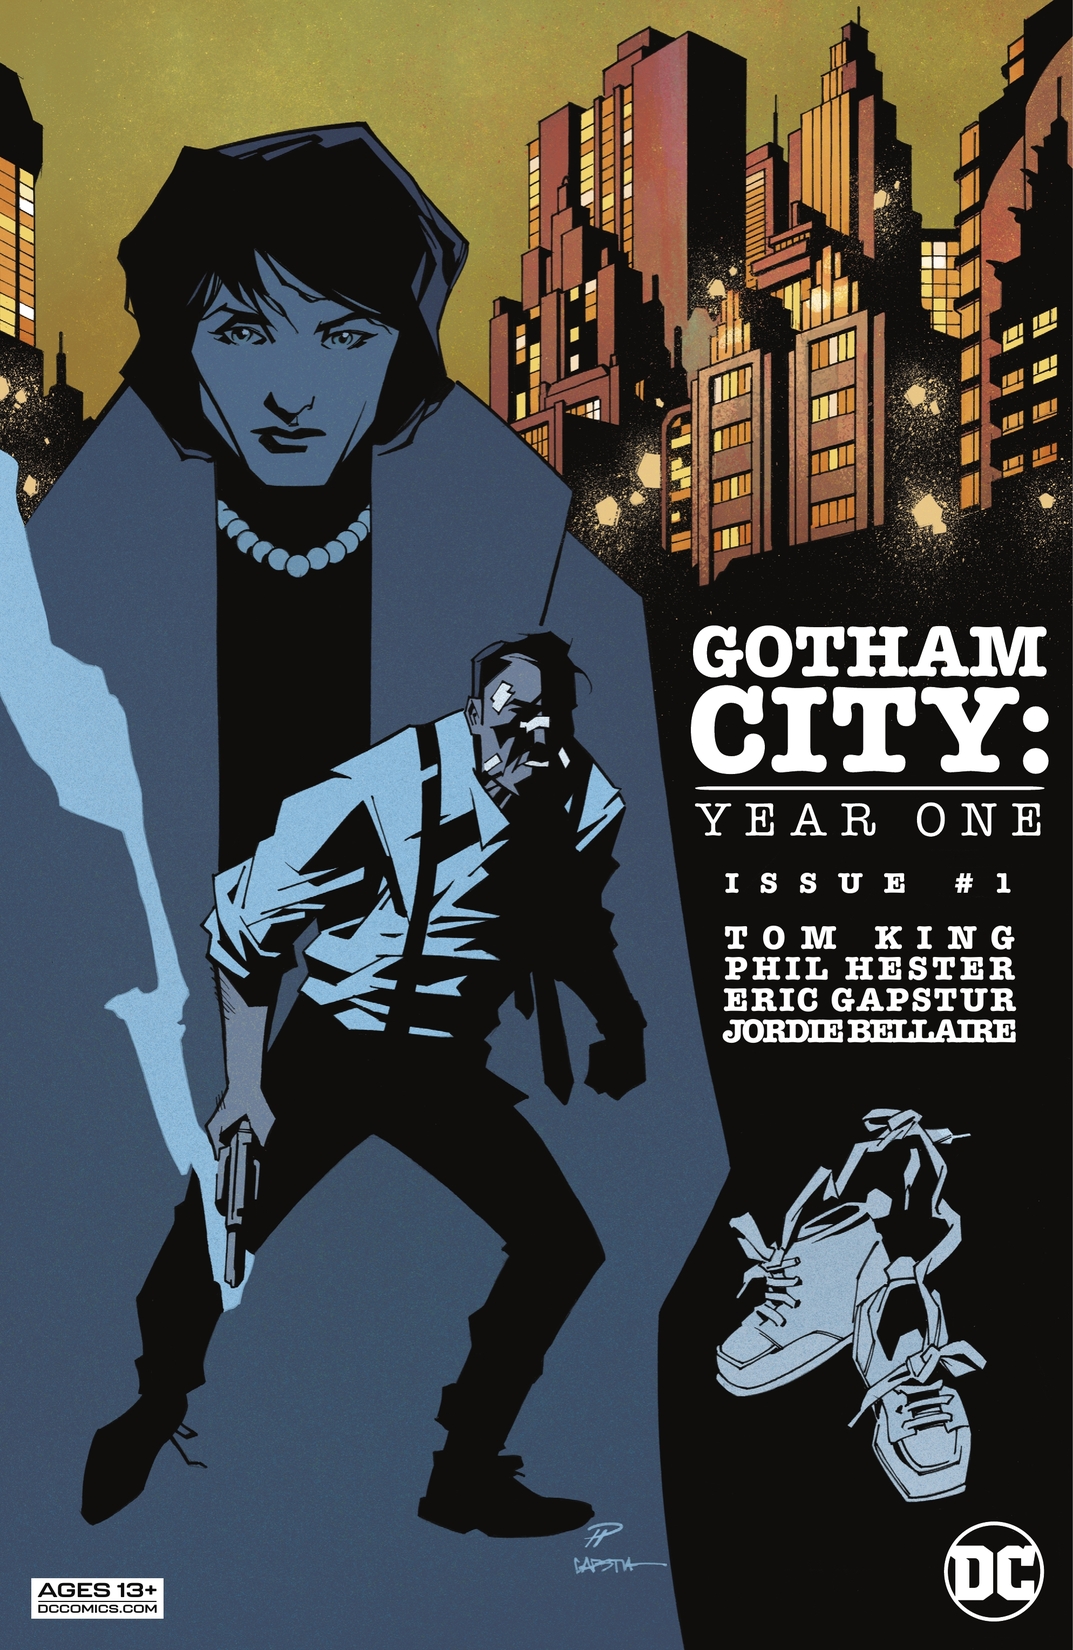 Gotham City: Year One #1 preview images